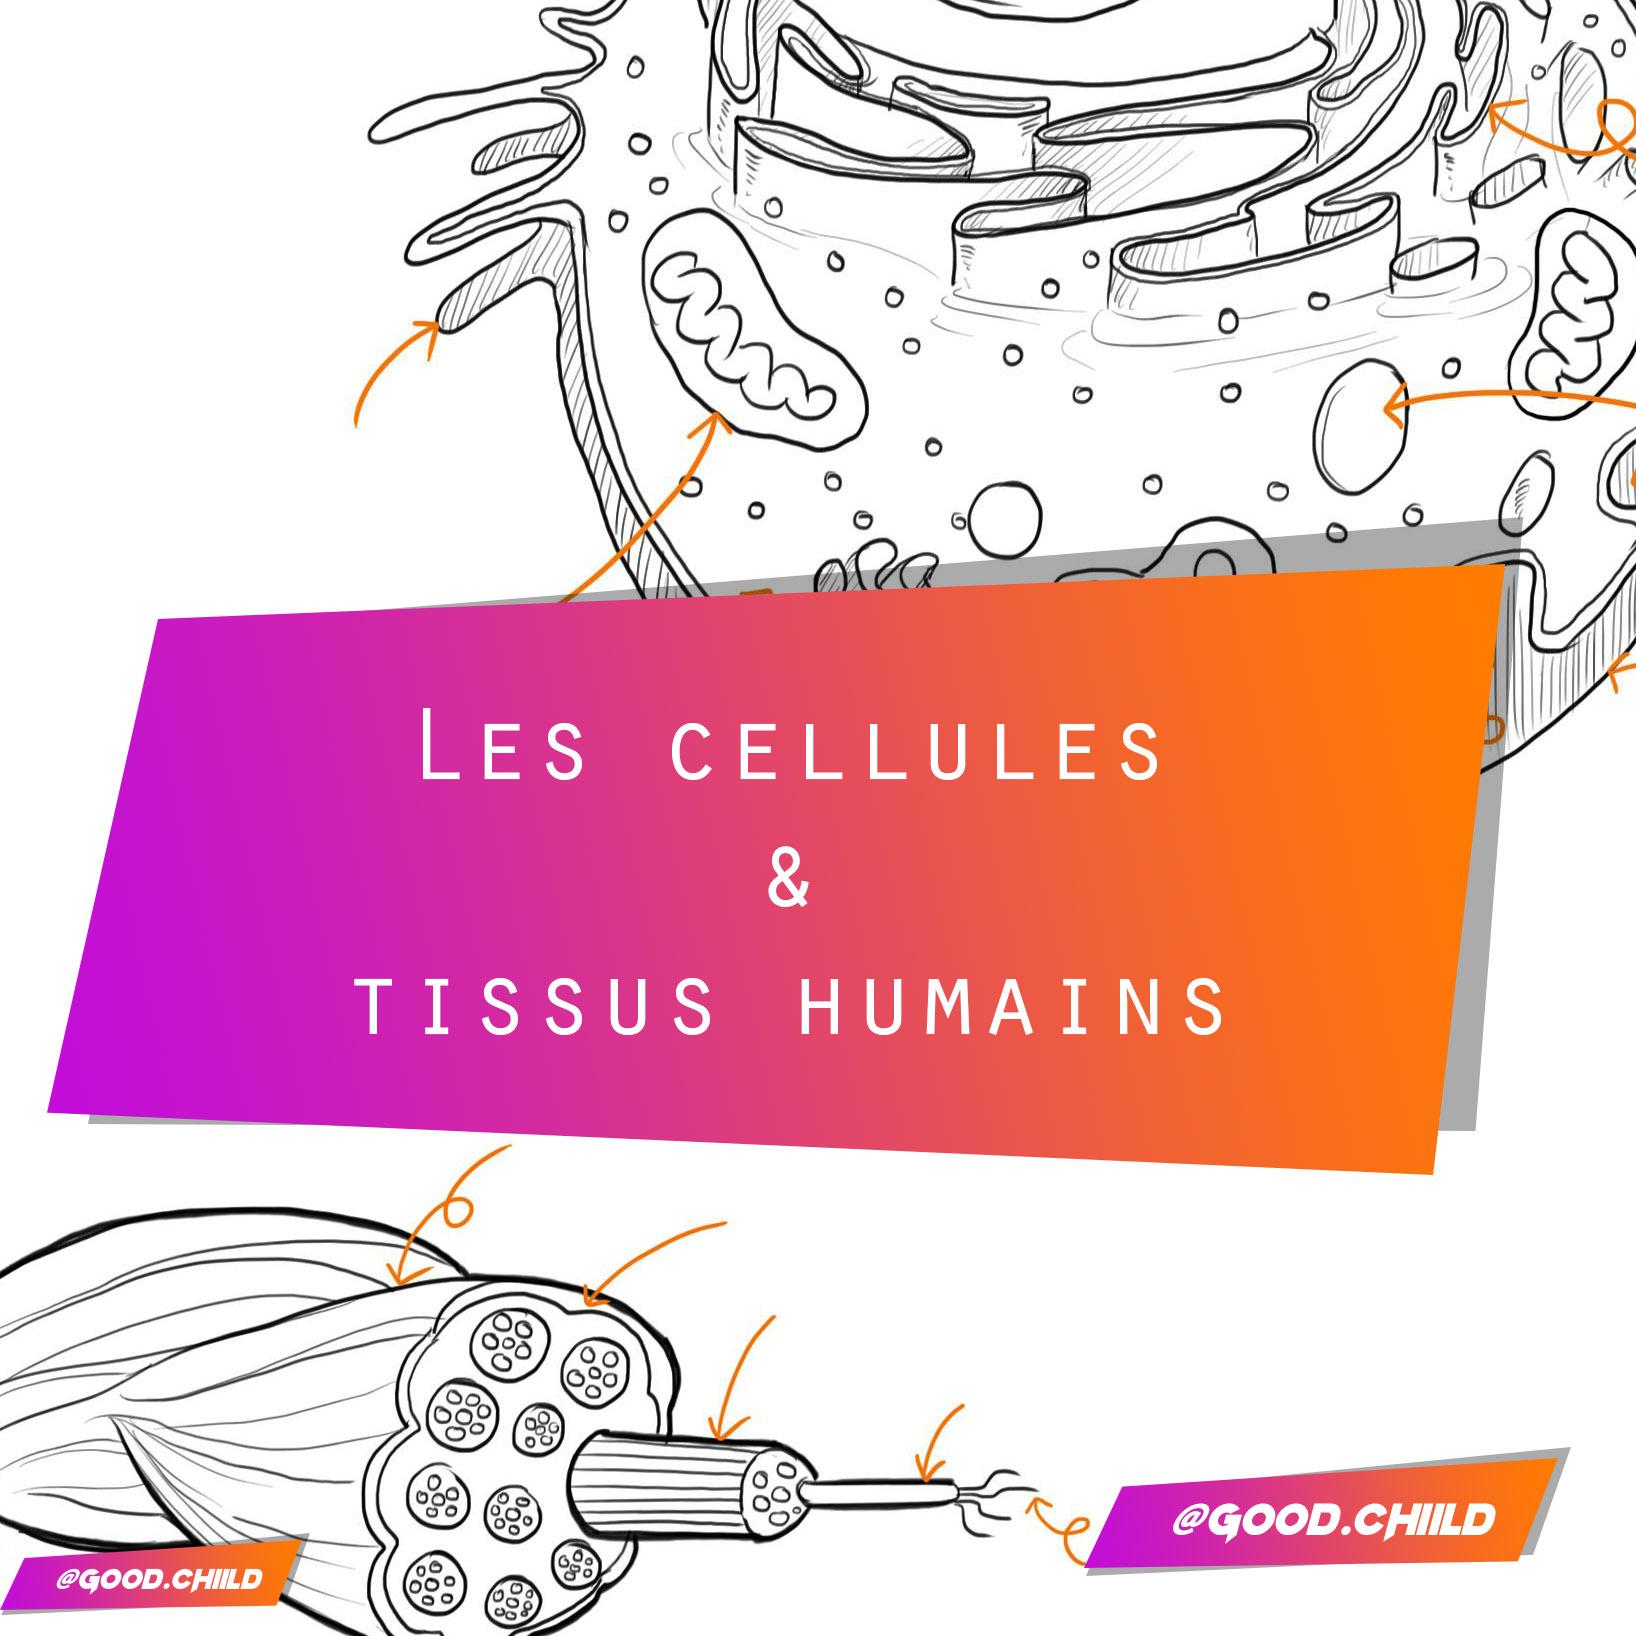 You are currently viewing Les cellules et tissus humains